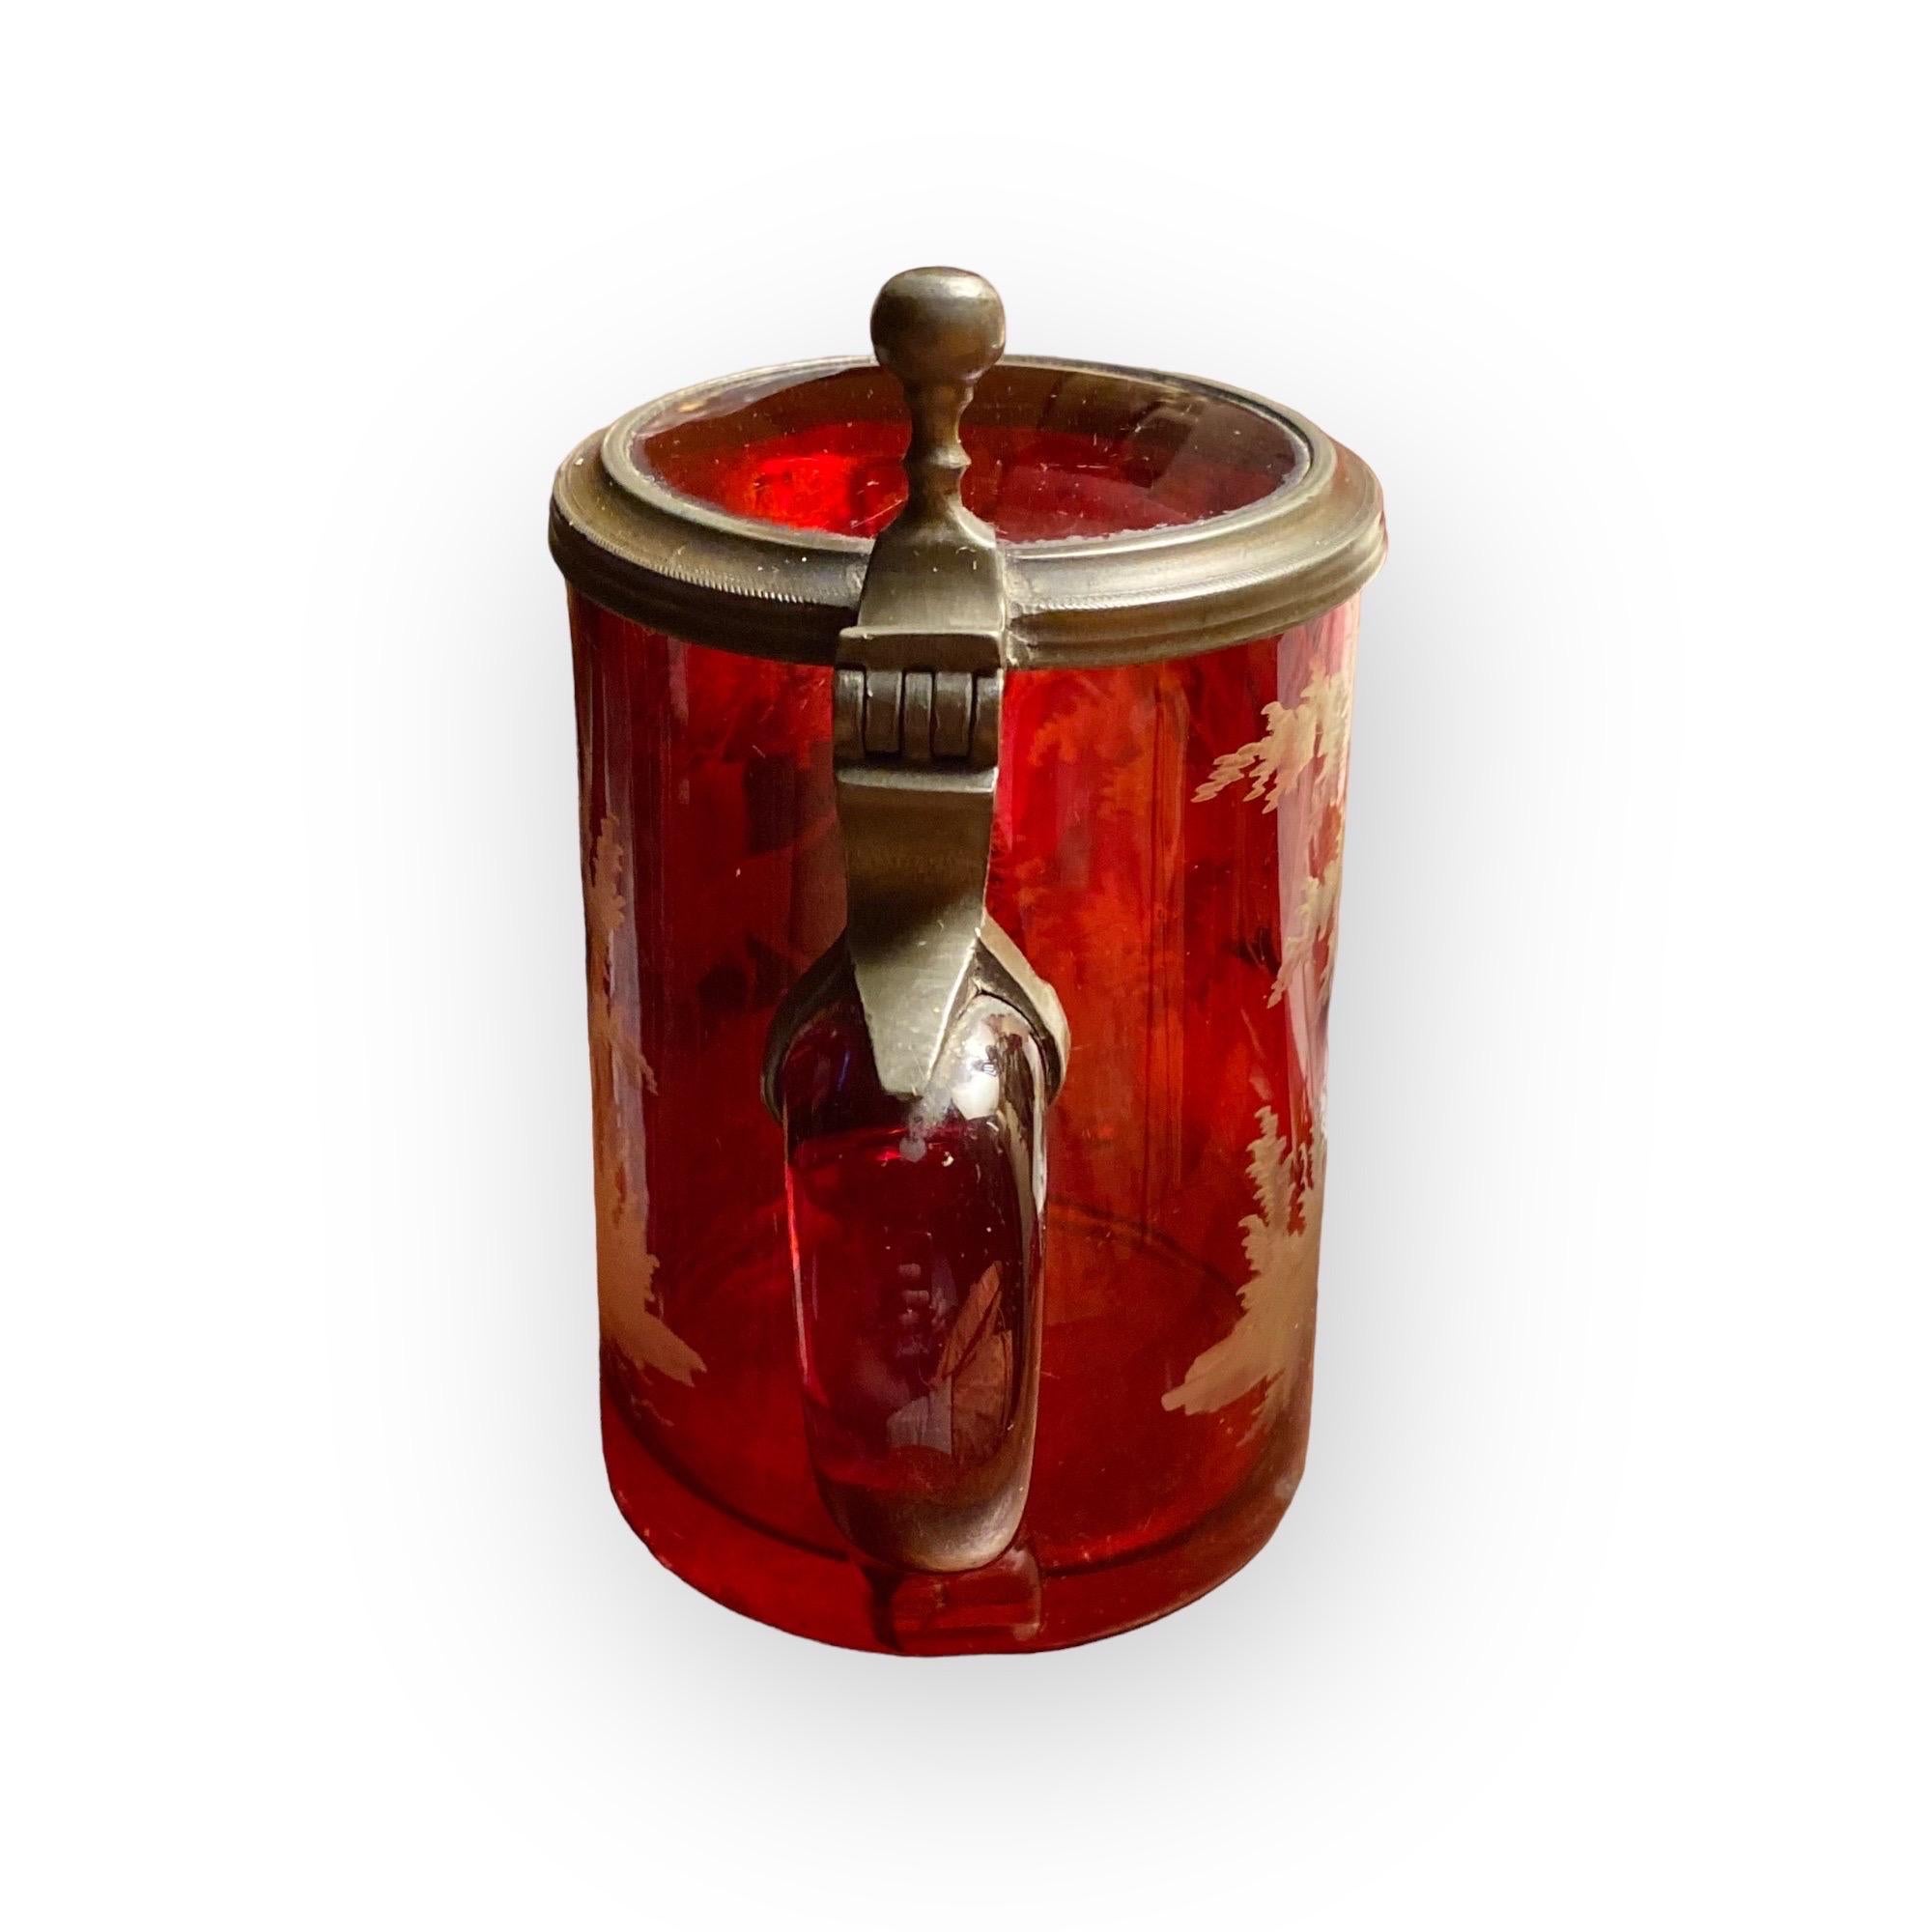 A stunning antique Bohemian etched red flash glass beer stein. It dates to the mid-19th century. This item has been handcrafted utilizing glass
etching and engraving depicting a wooded scene and a hunting dog. Its primary trait is the rare intense